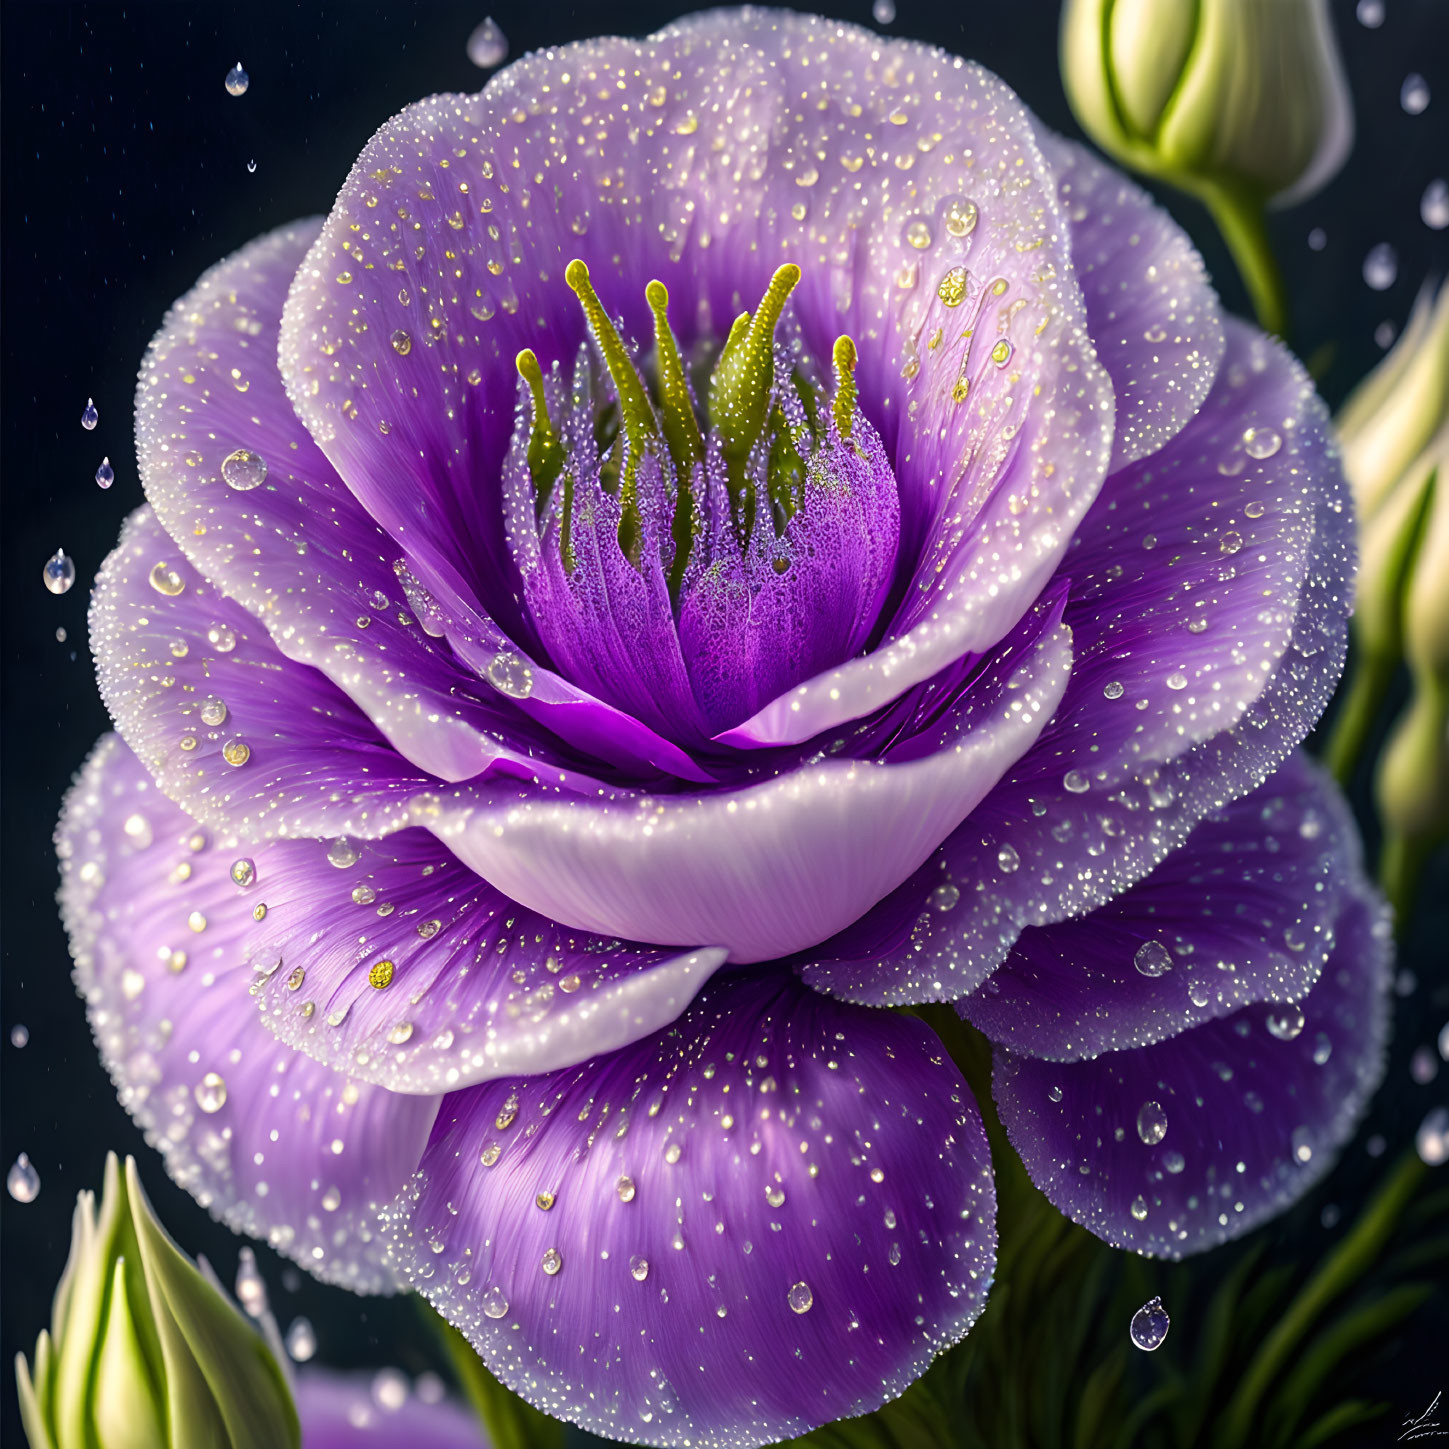 Detailed Purple and White Flower with Dew Drops on Petals against Dark Background